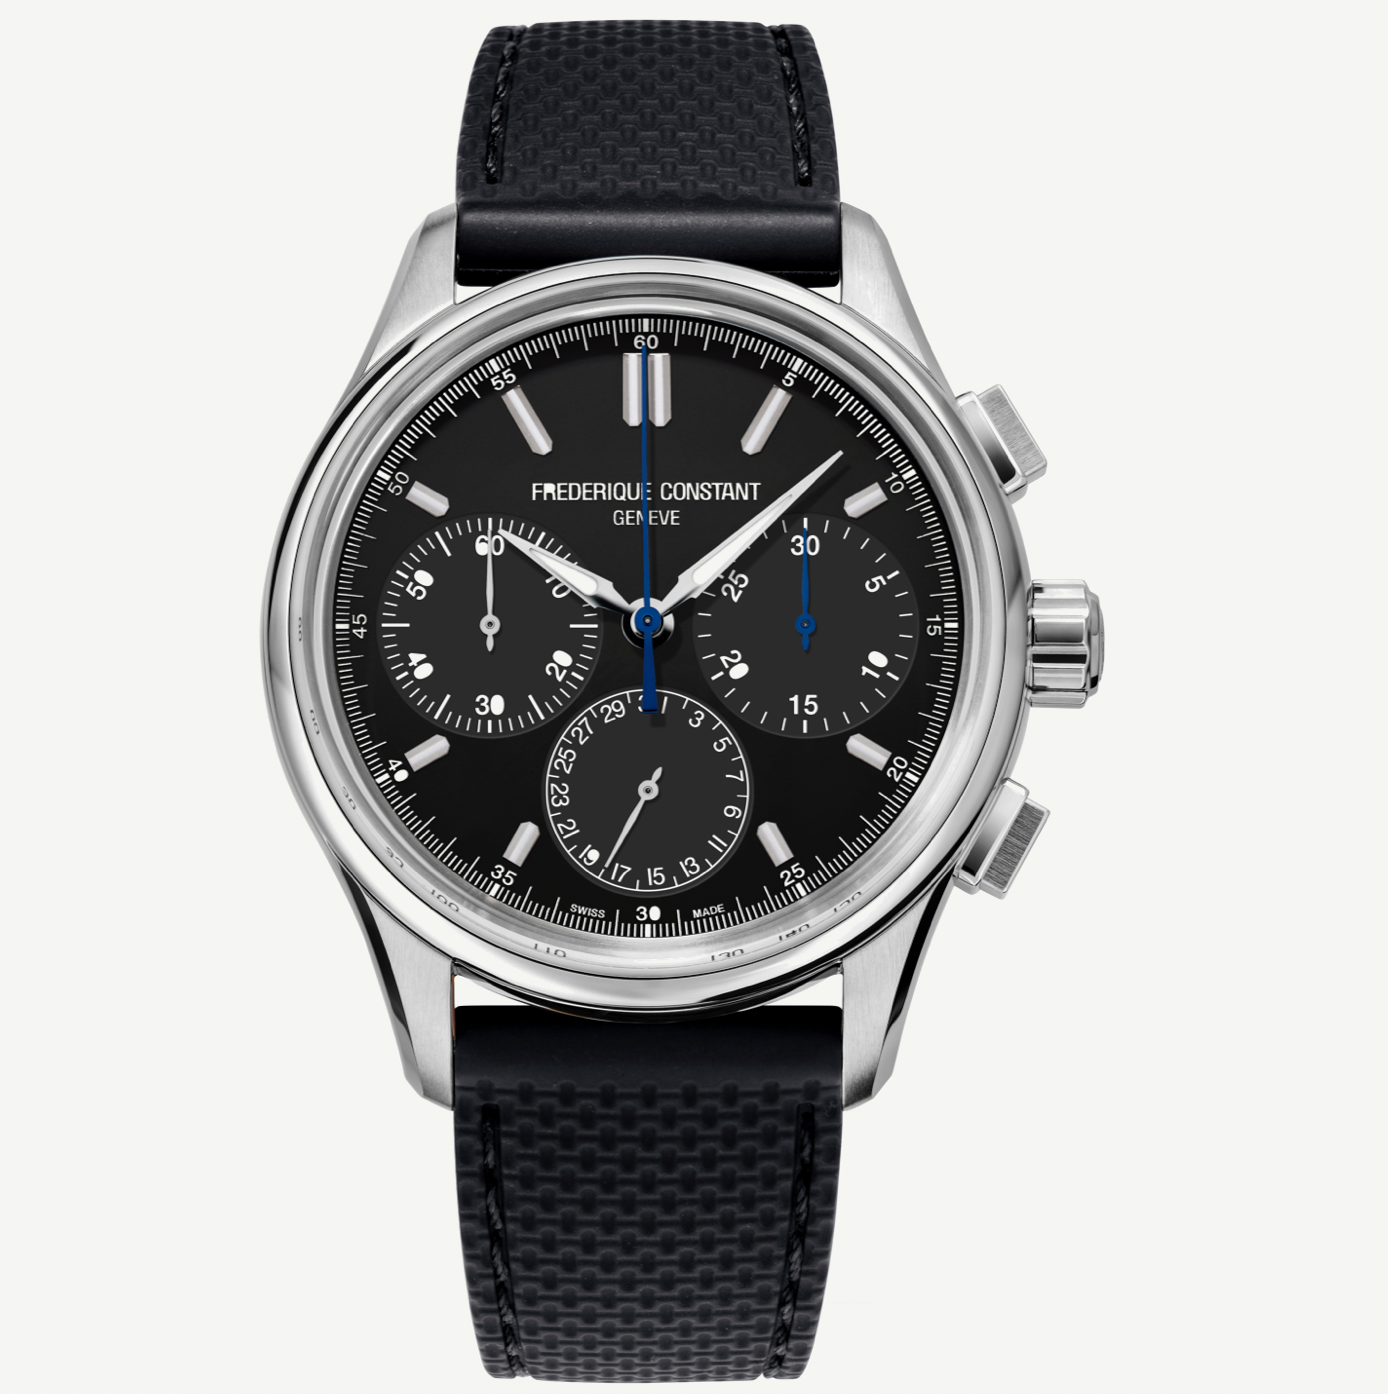 Frederique Constant Flyback Chronograph ”DailyWatch” II